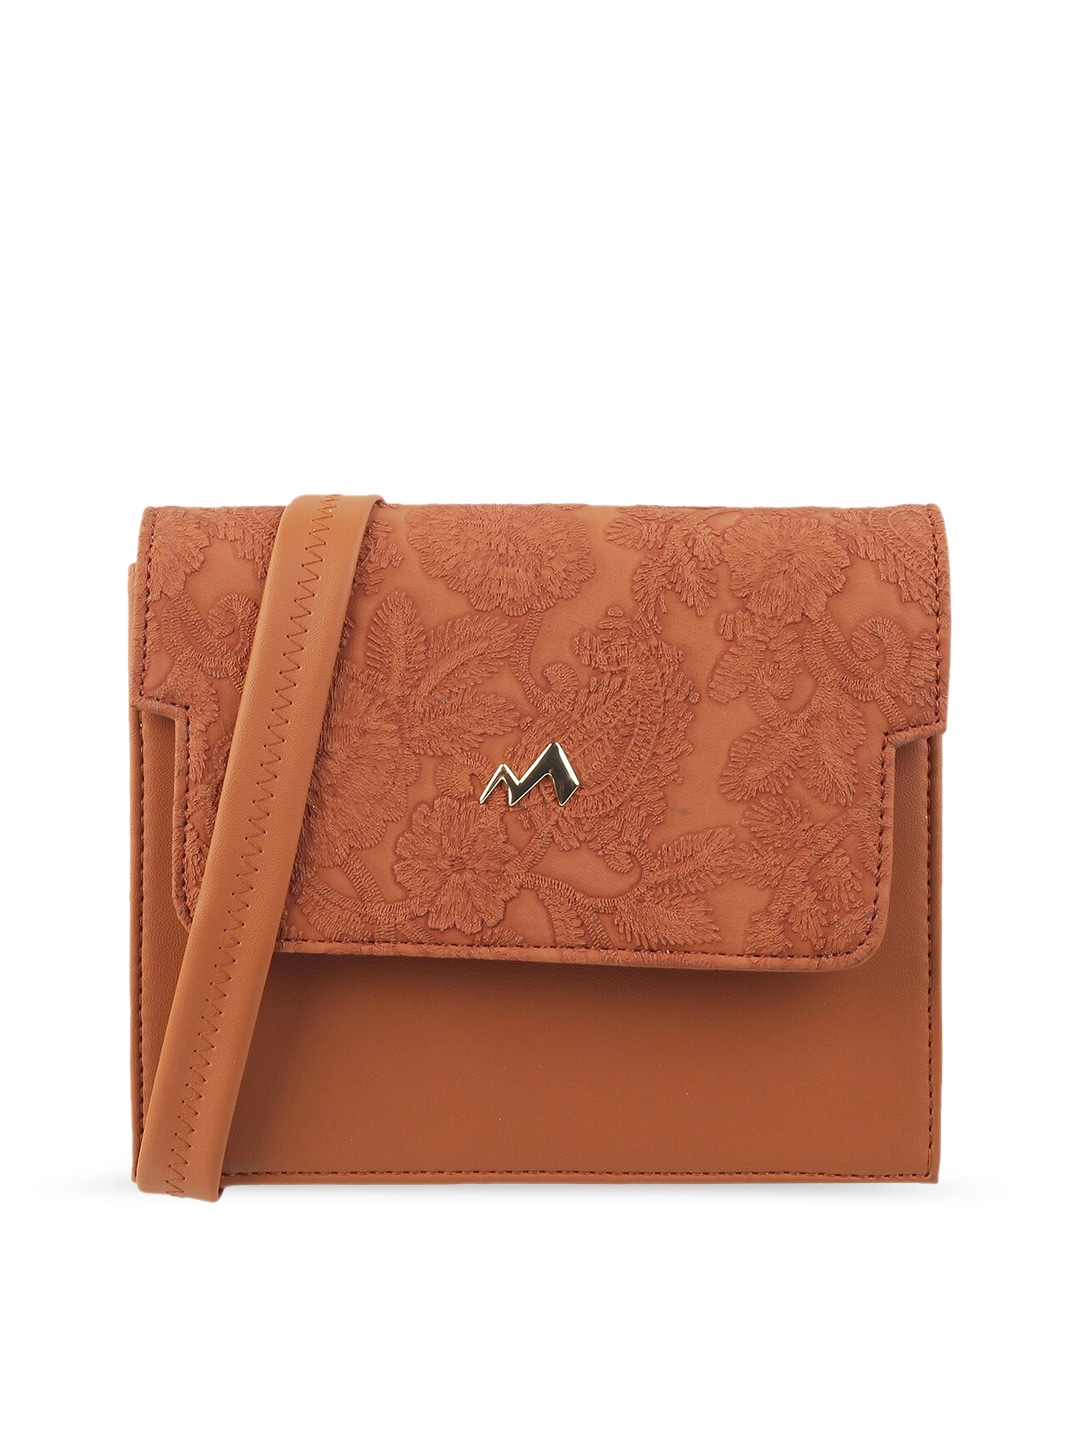 Metro Tan Textured PU Oversized Structured Sling Bag Price in India